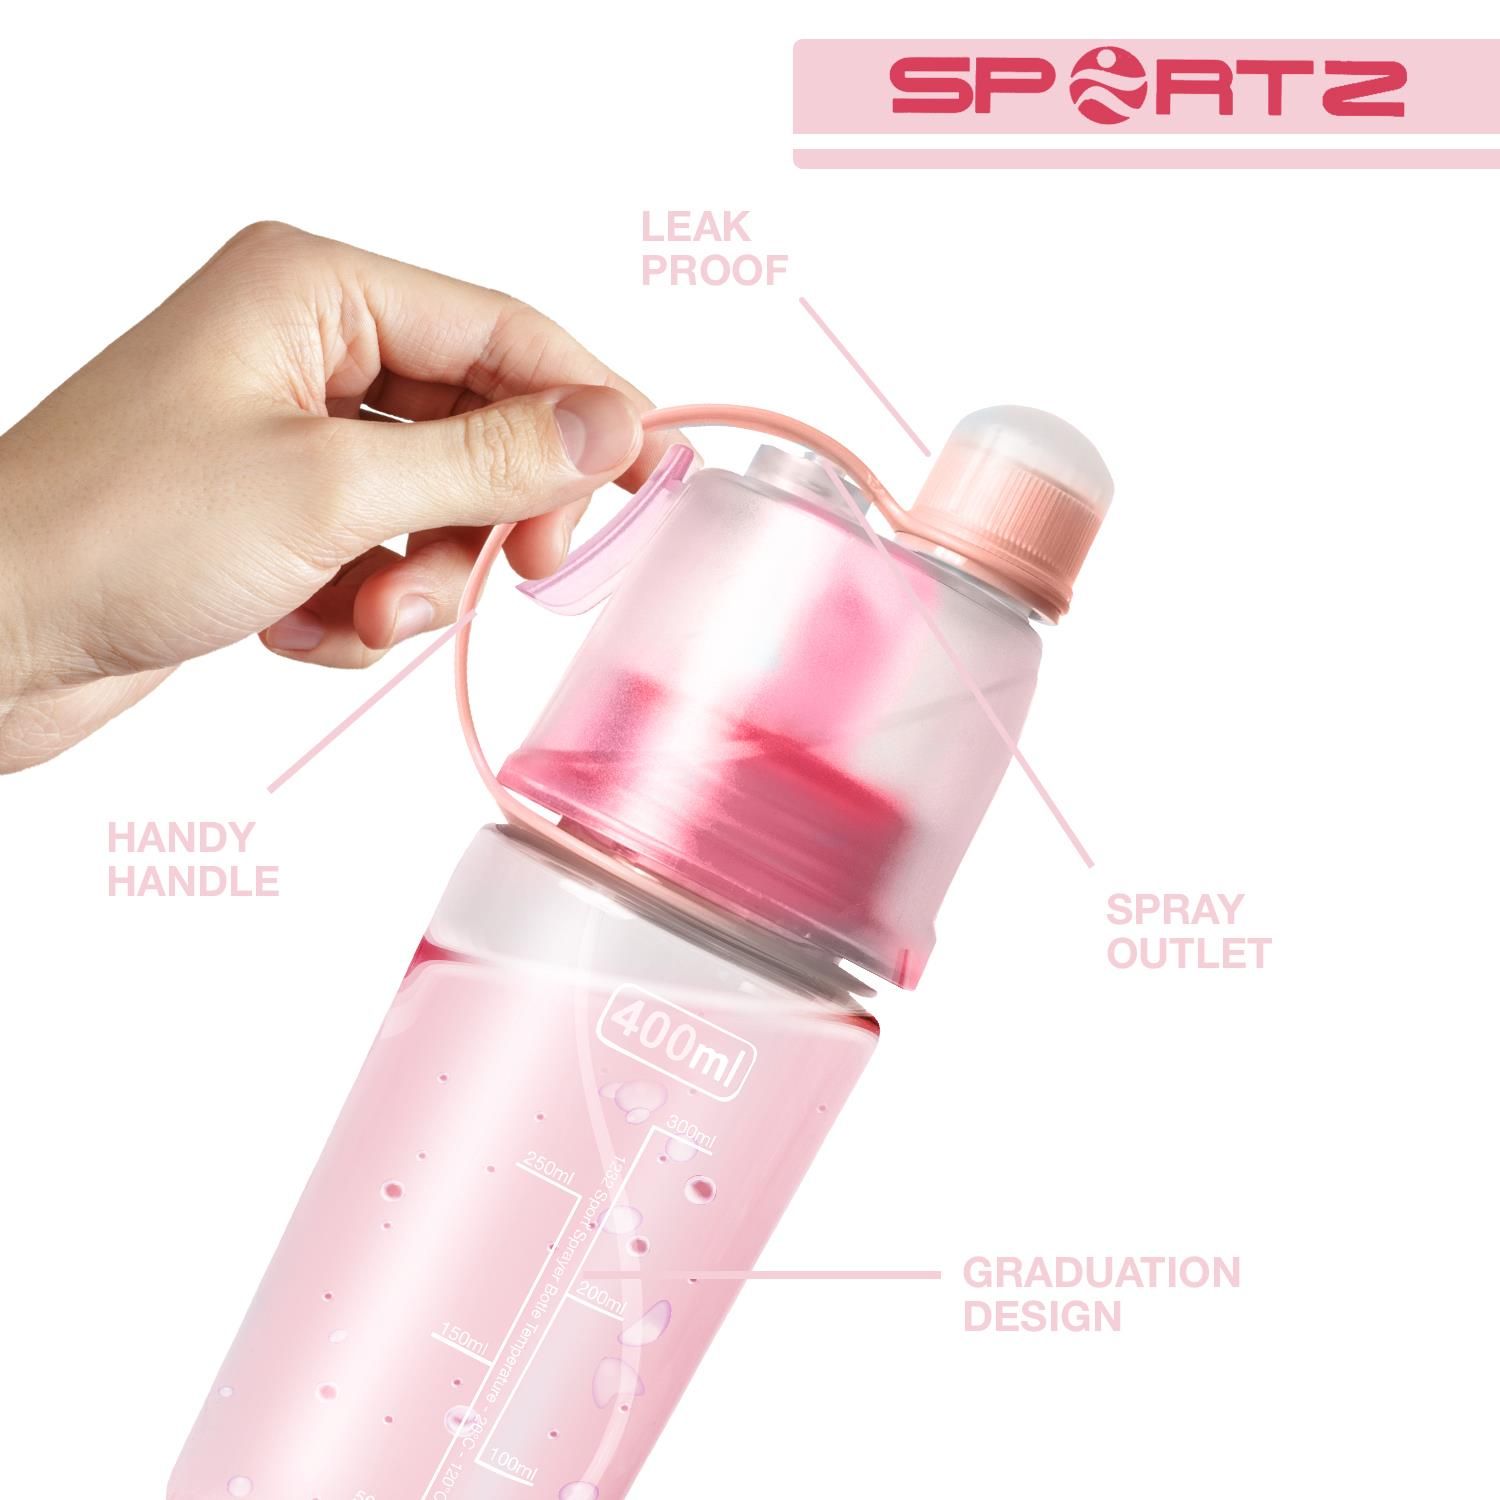 Travel Sports Water Bottle with Spray Function 400ml.  This spray water bottle has a button on the top of bottle to enable you to spray water.  Graduated design, there is scales on the bottle, so you can check your water capacity easily.  Leak proof design prevents the water leaking out. With portable handle and anti-lost lid, convenient to carry this sport water bottle to anywhere. Handle design is convenient for you to carry whether you are camping, hiking or traveling.  This creative water bottle can be useful in the car, train, office, school, sport or the gym. Water to quench your thirst, cooling spray, very suitable for students, office workers, sportsmen, outdoor people, groups, long-term driving.